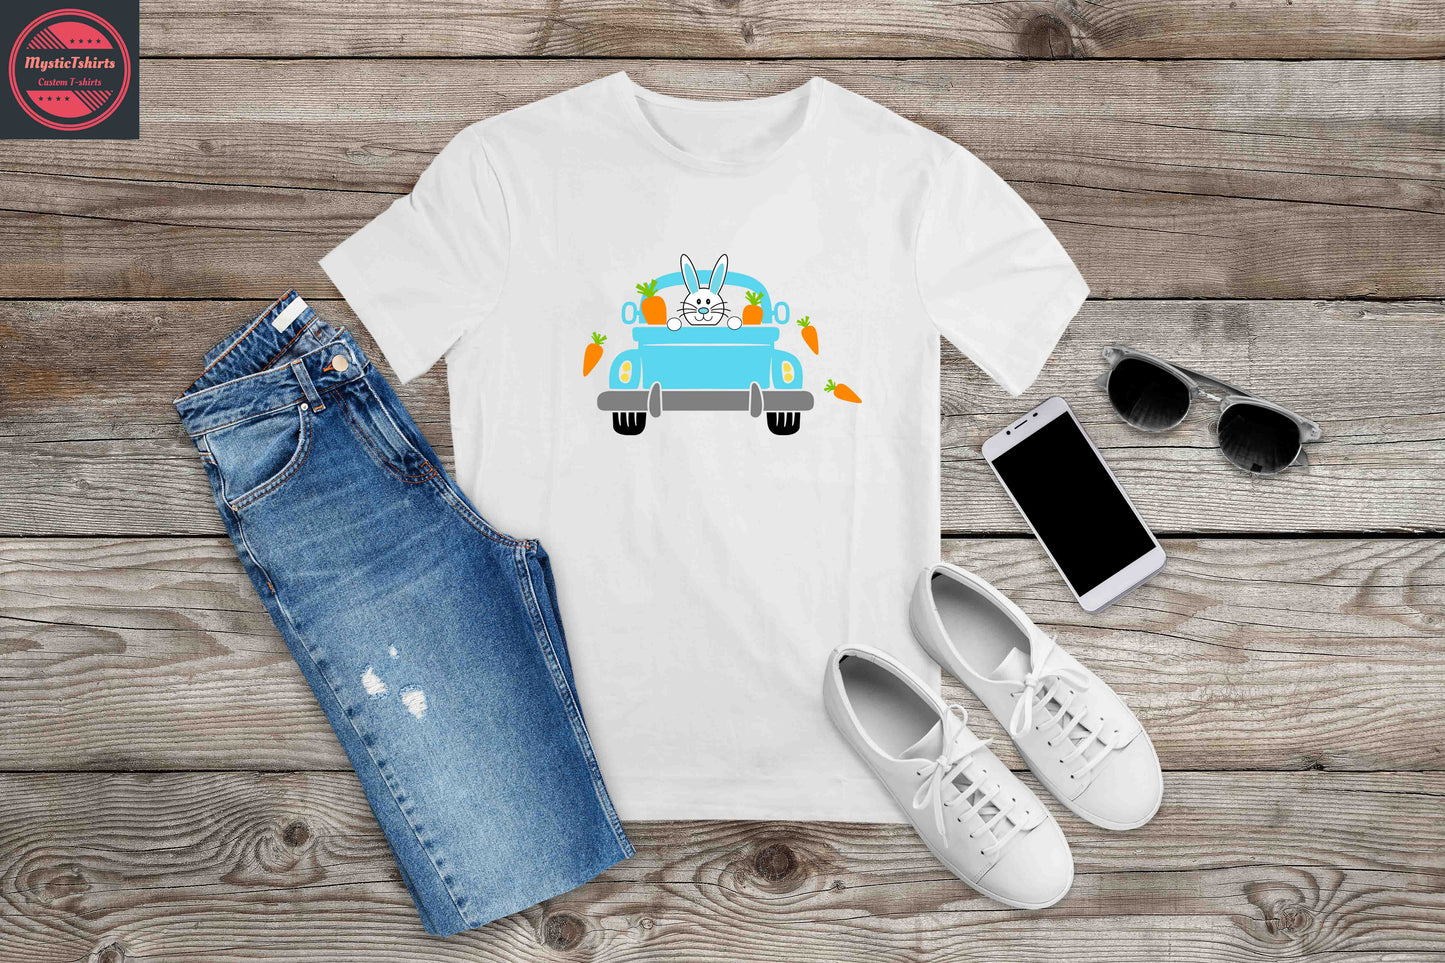 041. BUNNY IN TRUCK, Custom Made Shirt, Personalized T-Shirt, Custom Text, Make Your Own Shirt, Custom Tee